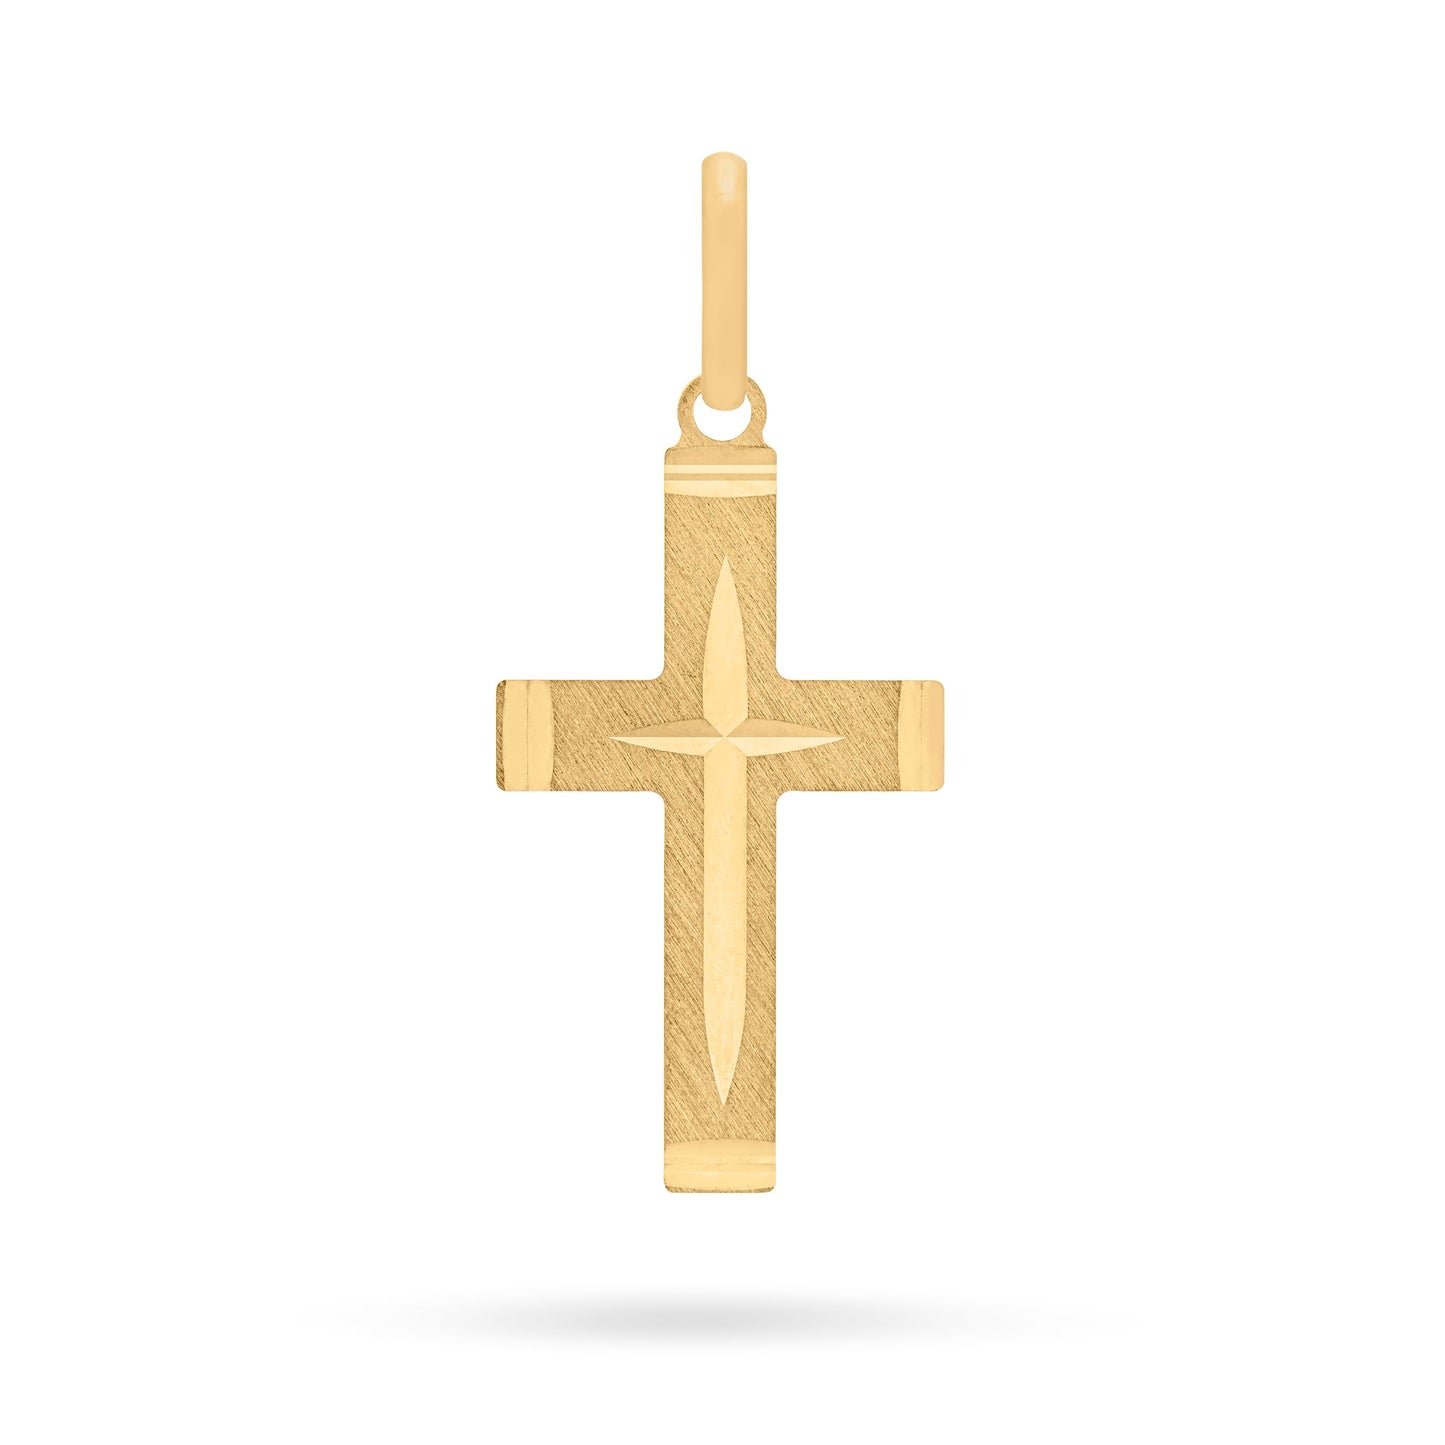 Mondo Cattolico Pendant 21 mm (0.83 in) Brushed Gold-plated Sterling Silver Cross Pendant With Polished Ends and Interior